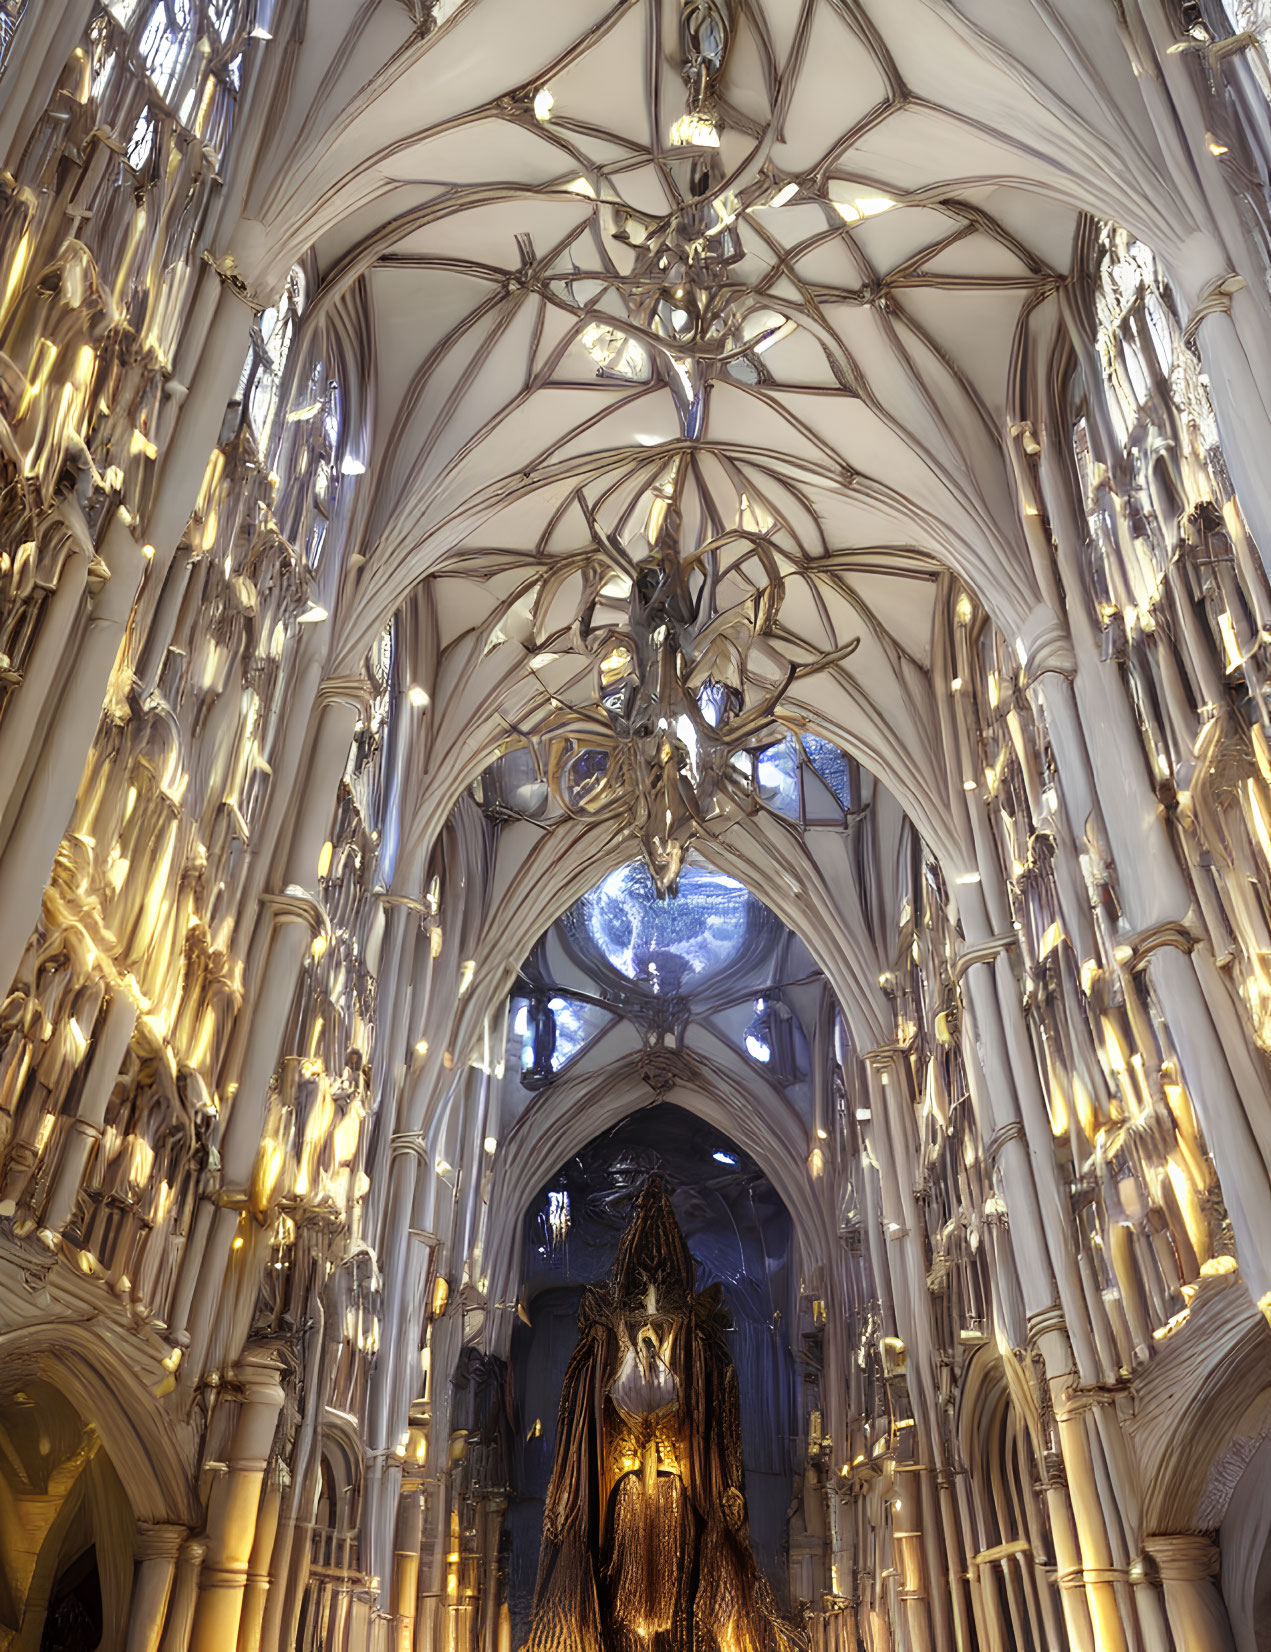 Opulent Gothic interior with vaulted ceilings and central figure